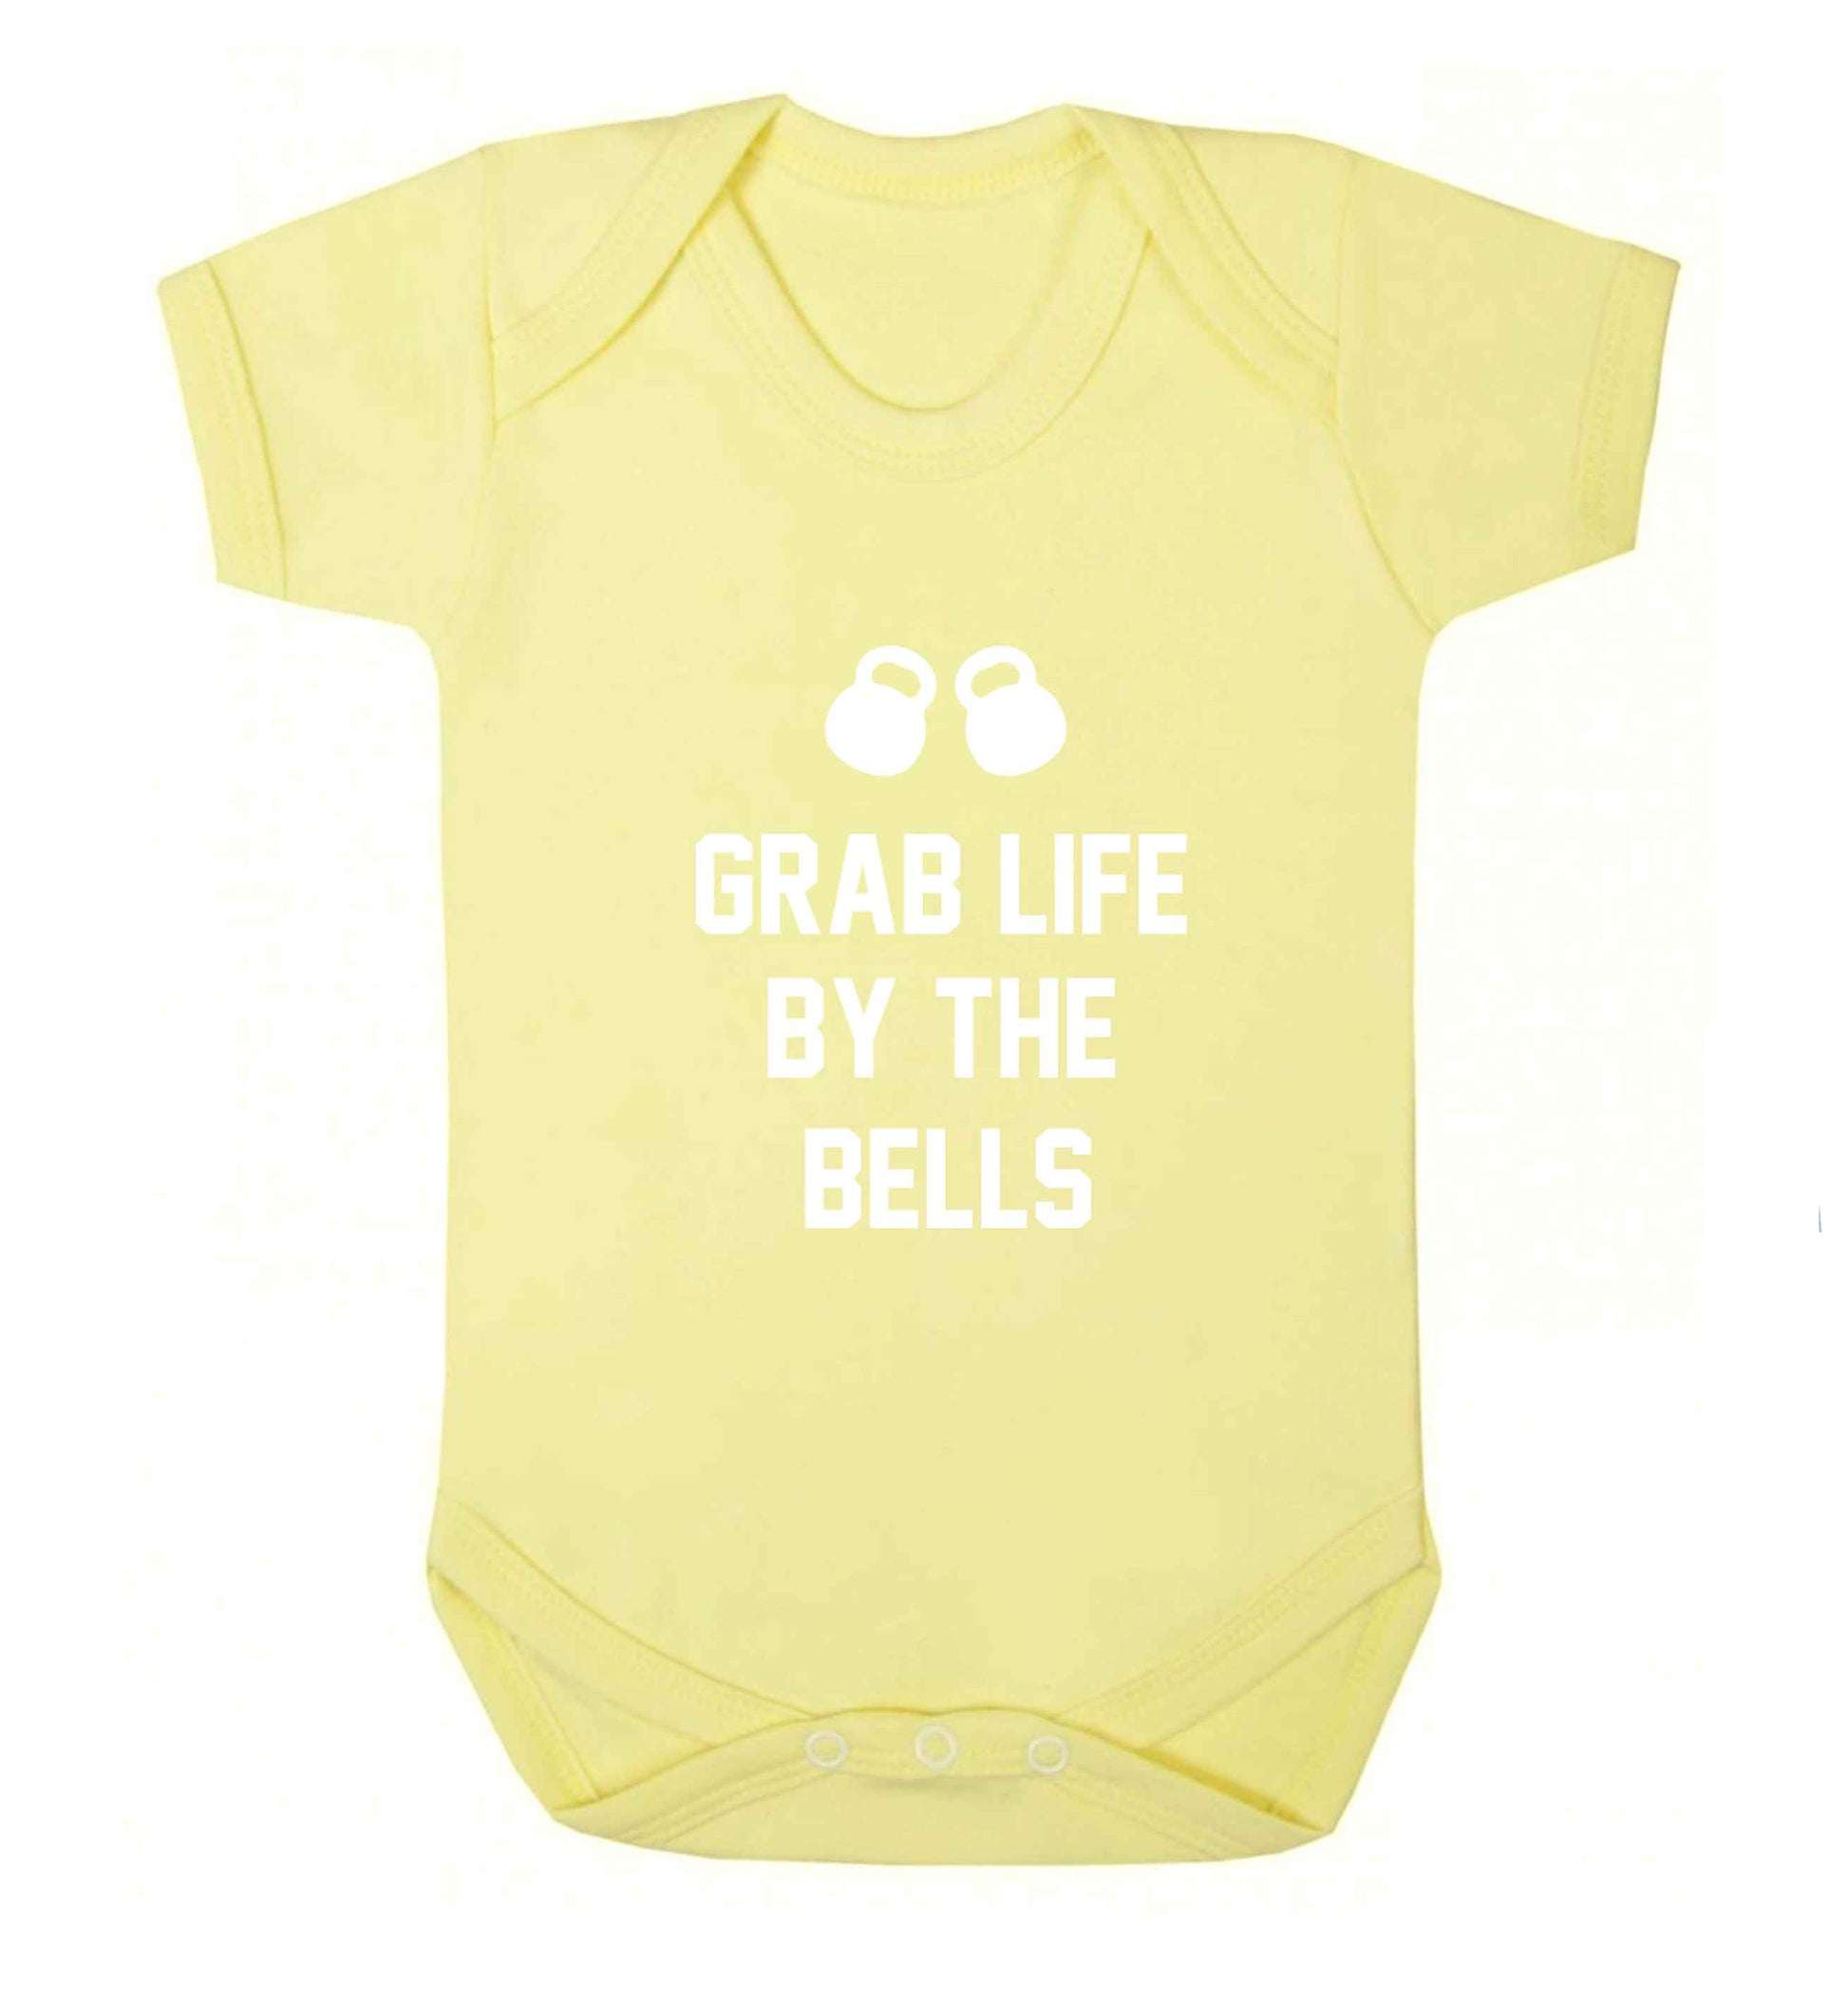 Grab life by the bells baby vest pale yellow 18-24 months